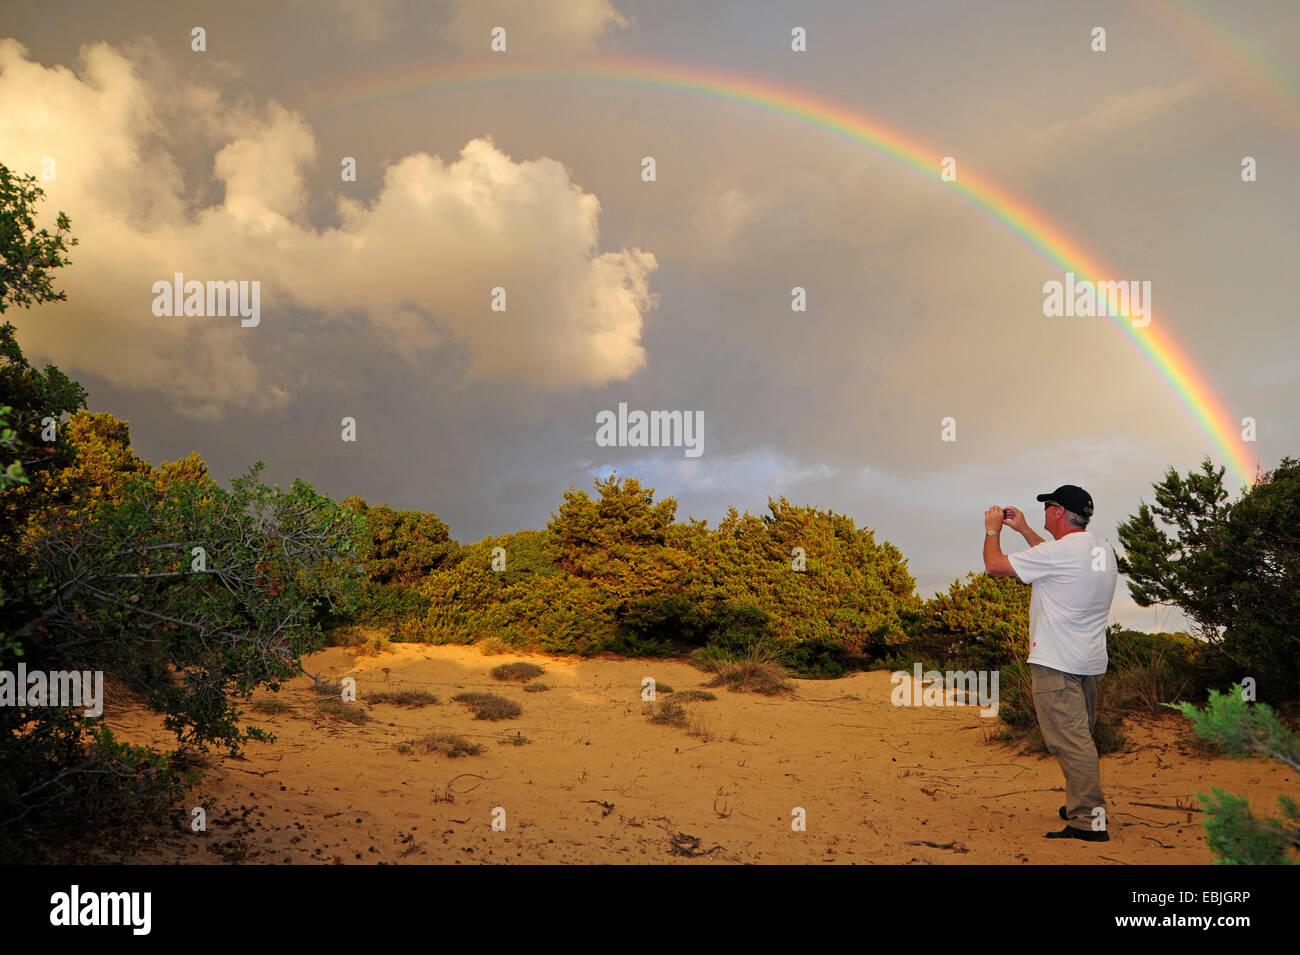 nature photographer picturing the rainbow over the dunes at the West Peloponnese, Greece, Peloponnese, Messenia Stock Photo